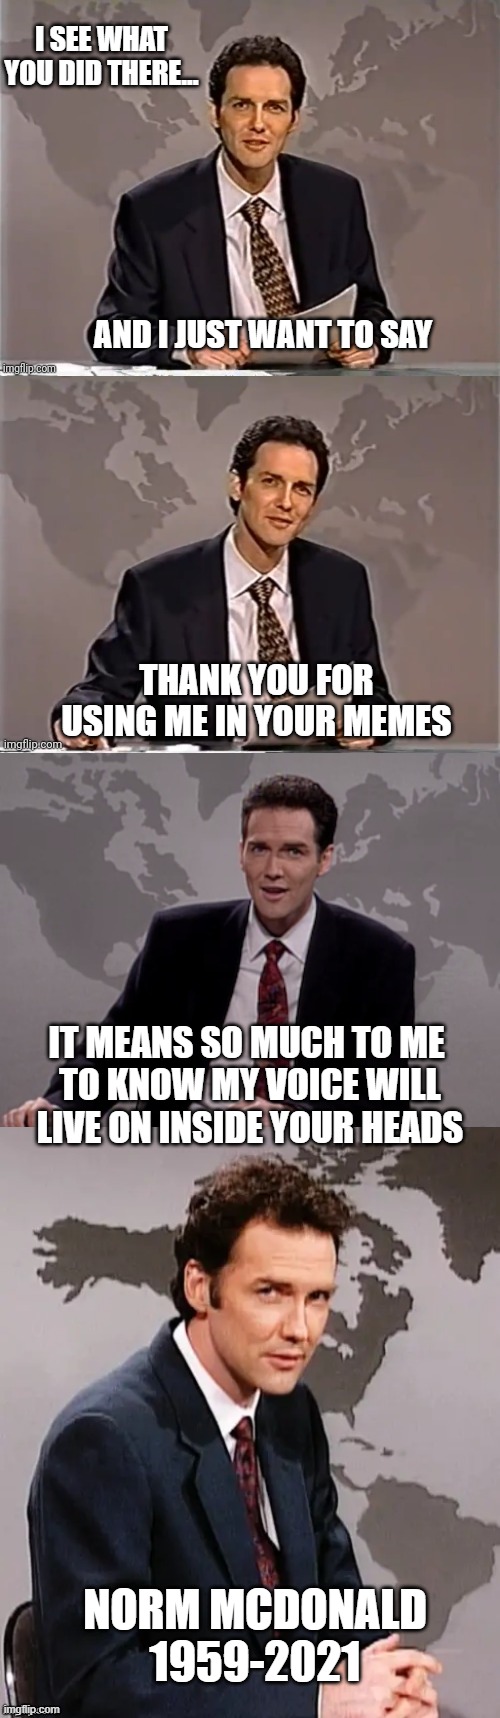 Norm McDonald 1959-2021 | I SEE WHAT YOU DID THERE... AND I JUST WANT TO SAY; THANK YOU FOR USING ME IN YOUR MEMES; IT MEANS SO MUCH TO ME 
TO KNOW MY VOICE WILL LIVE ON INSIDE YOUR HEADS; NORM MCDONALD
1959-2021 | image tagged in weekend update with norm,norm macdonald weekend update,norm mcdonald weekend update,rip | made w/ Imgflip meme maker